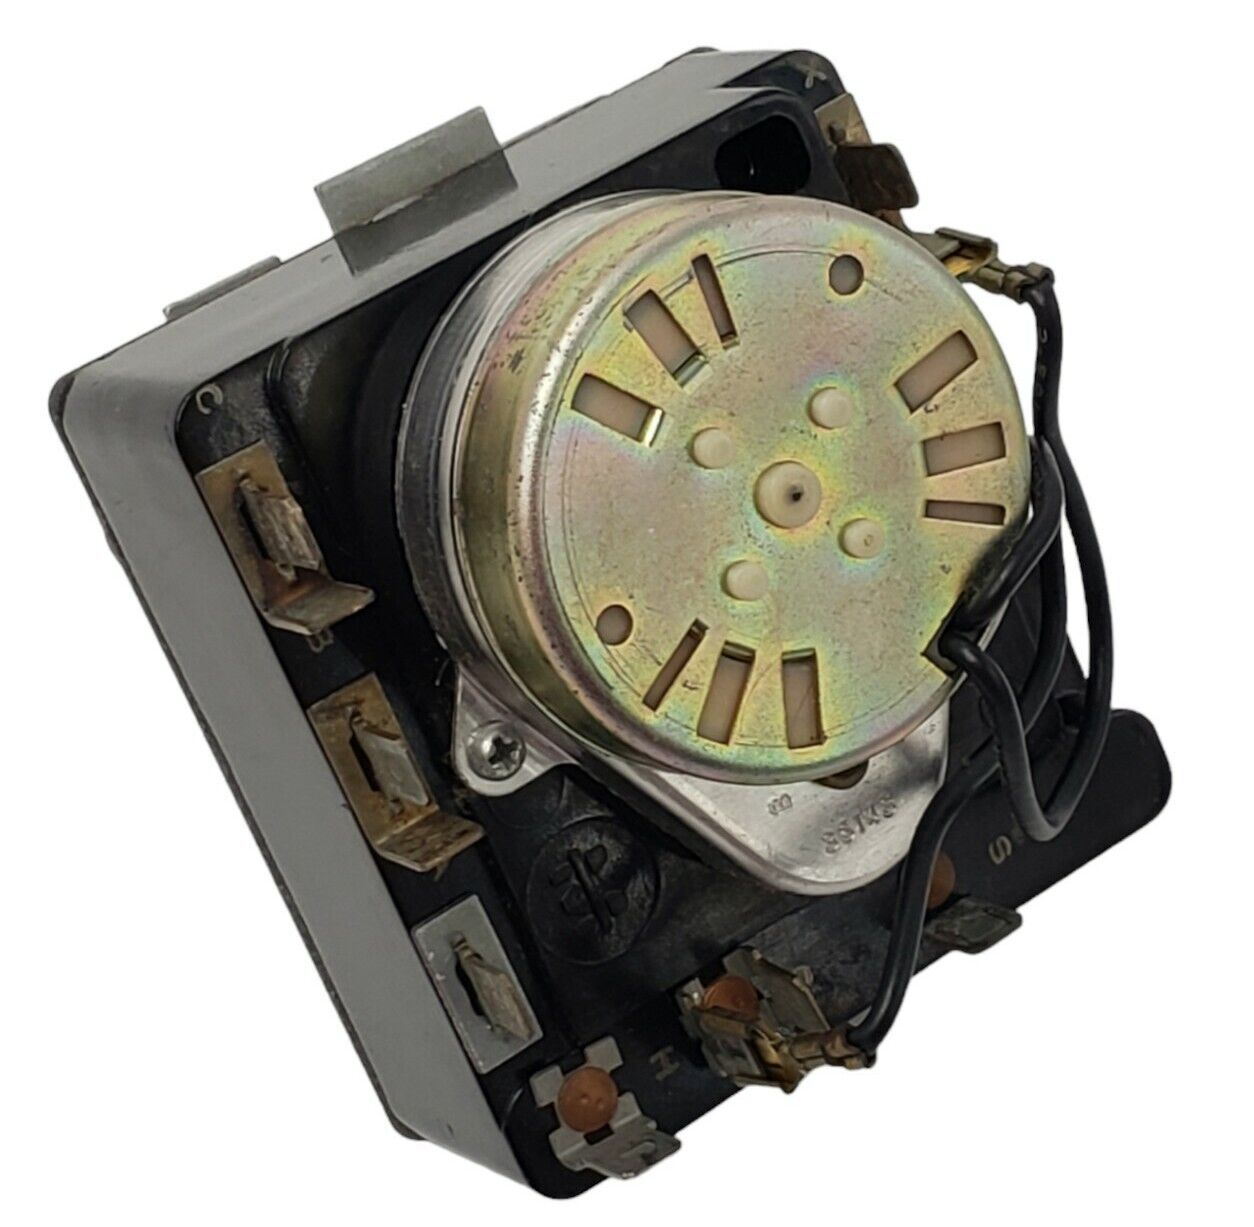 OEM Replacement for GE Dryer Timer 963D191G012